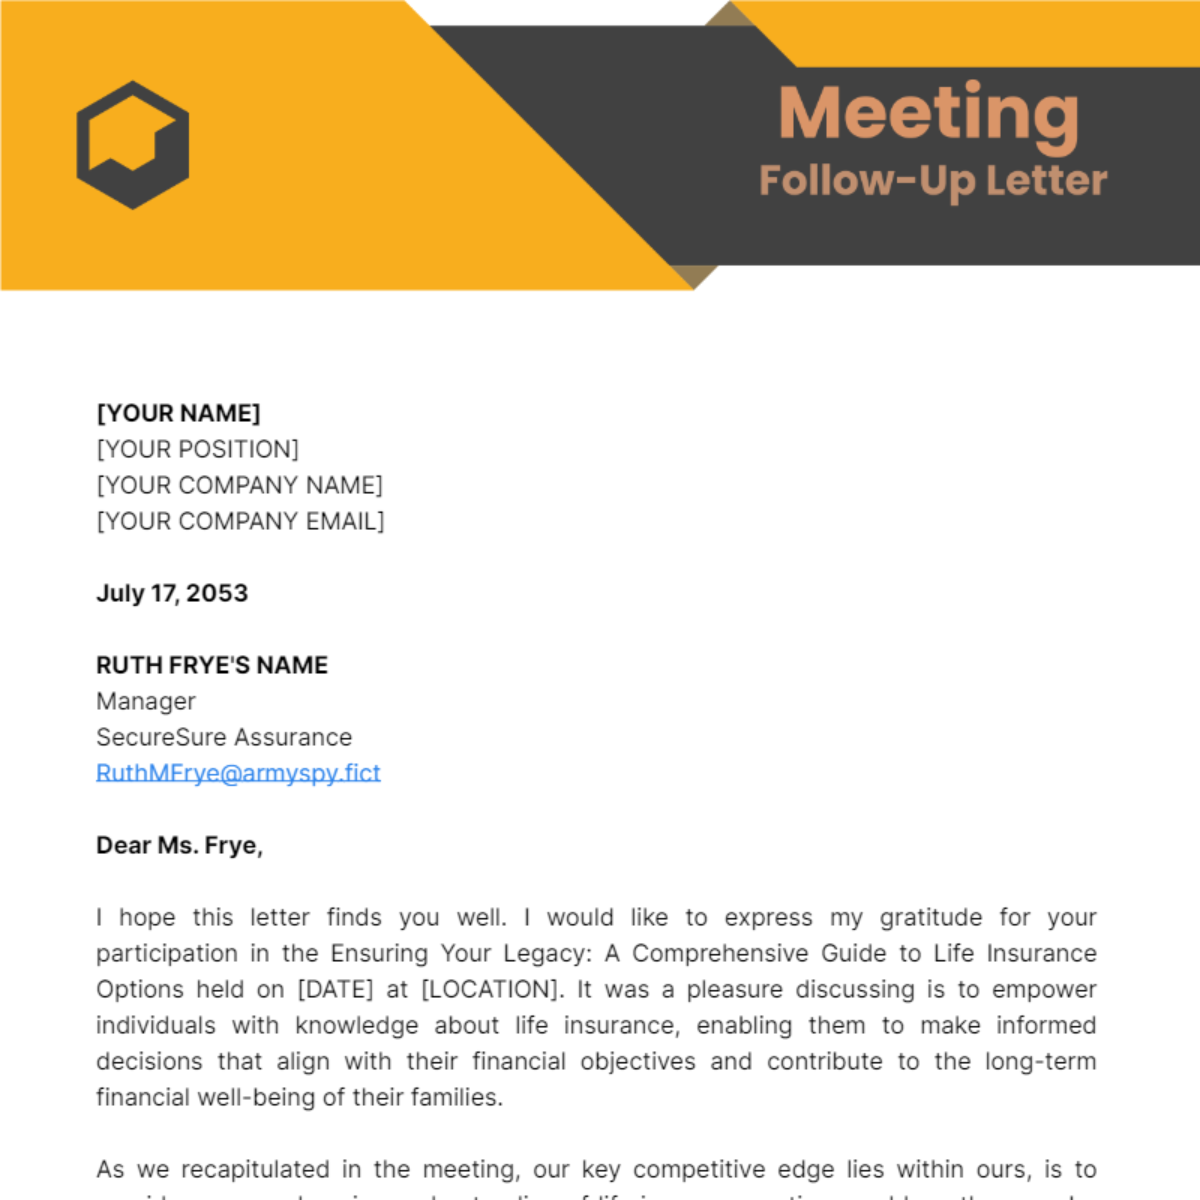 Meeting Follow-Up Letter Template